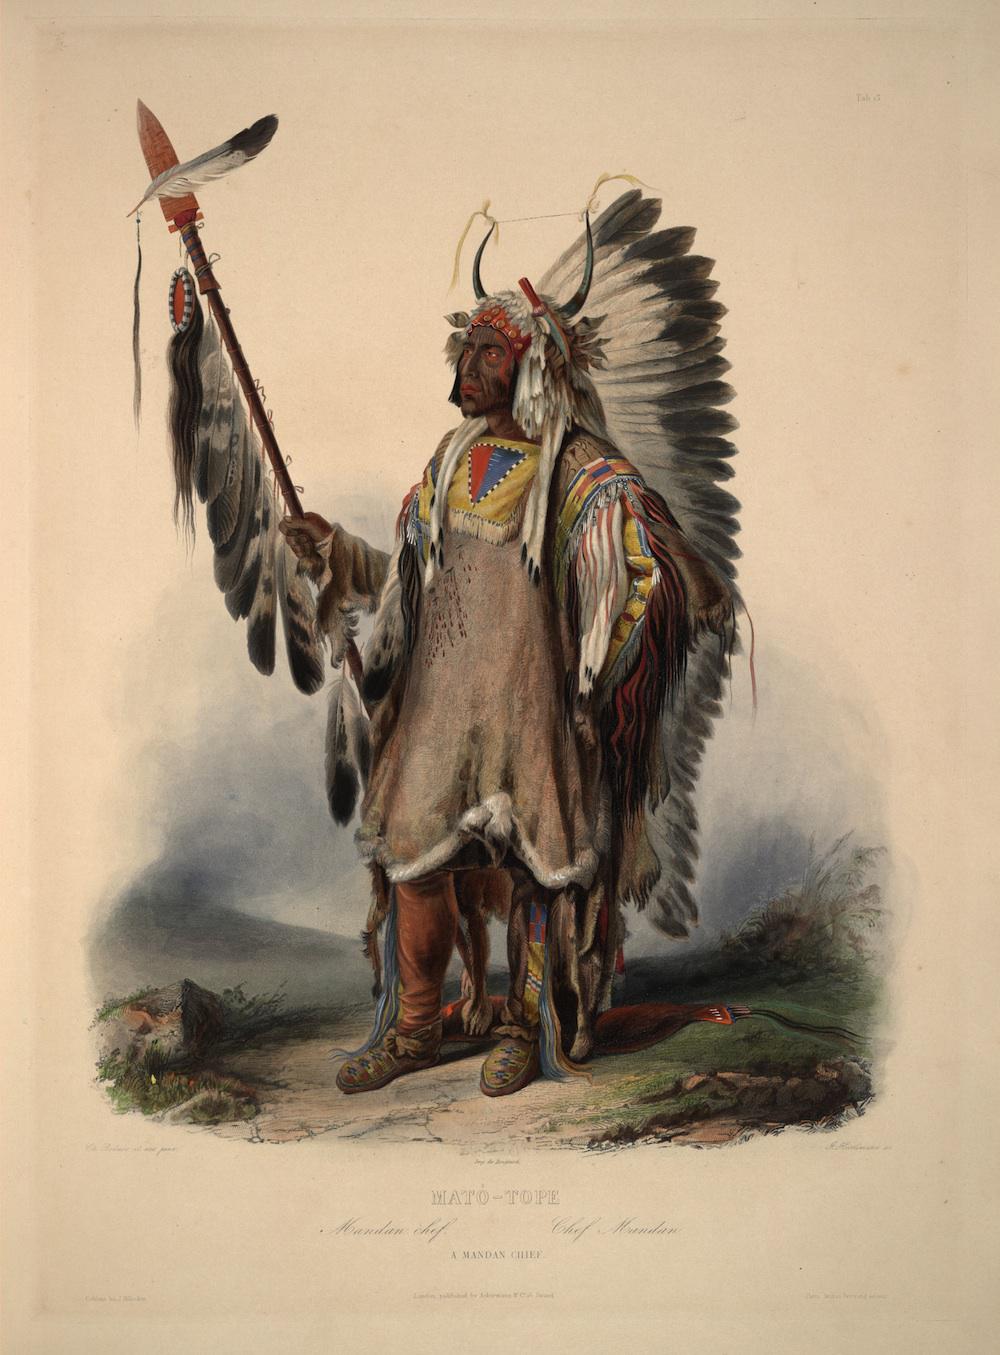 Portraits of Native Americans by Karl Bodmer.